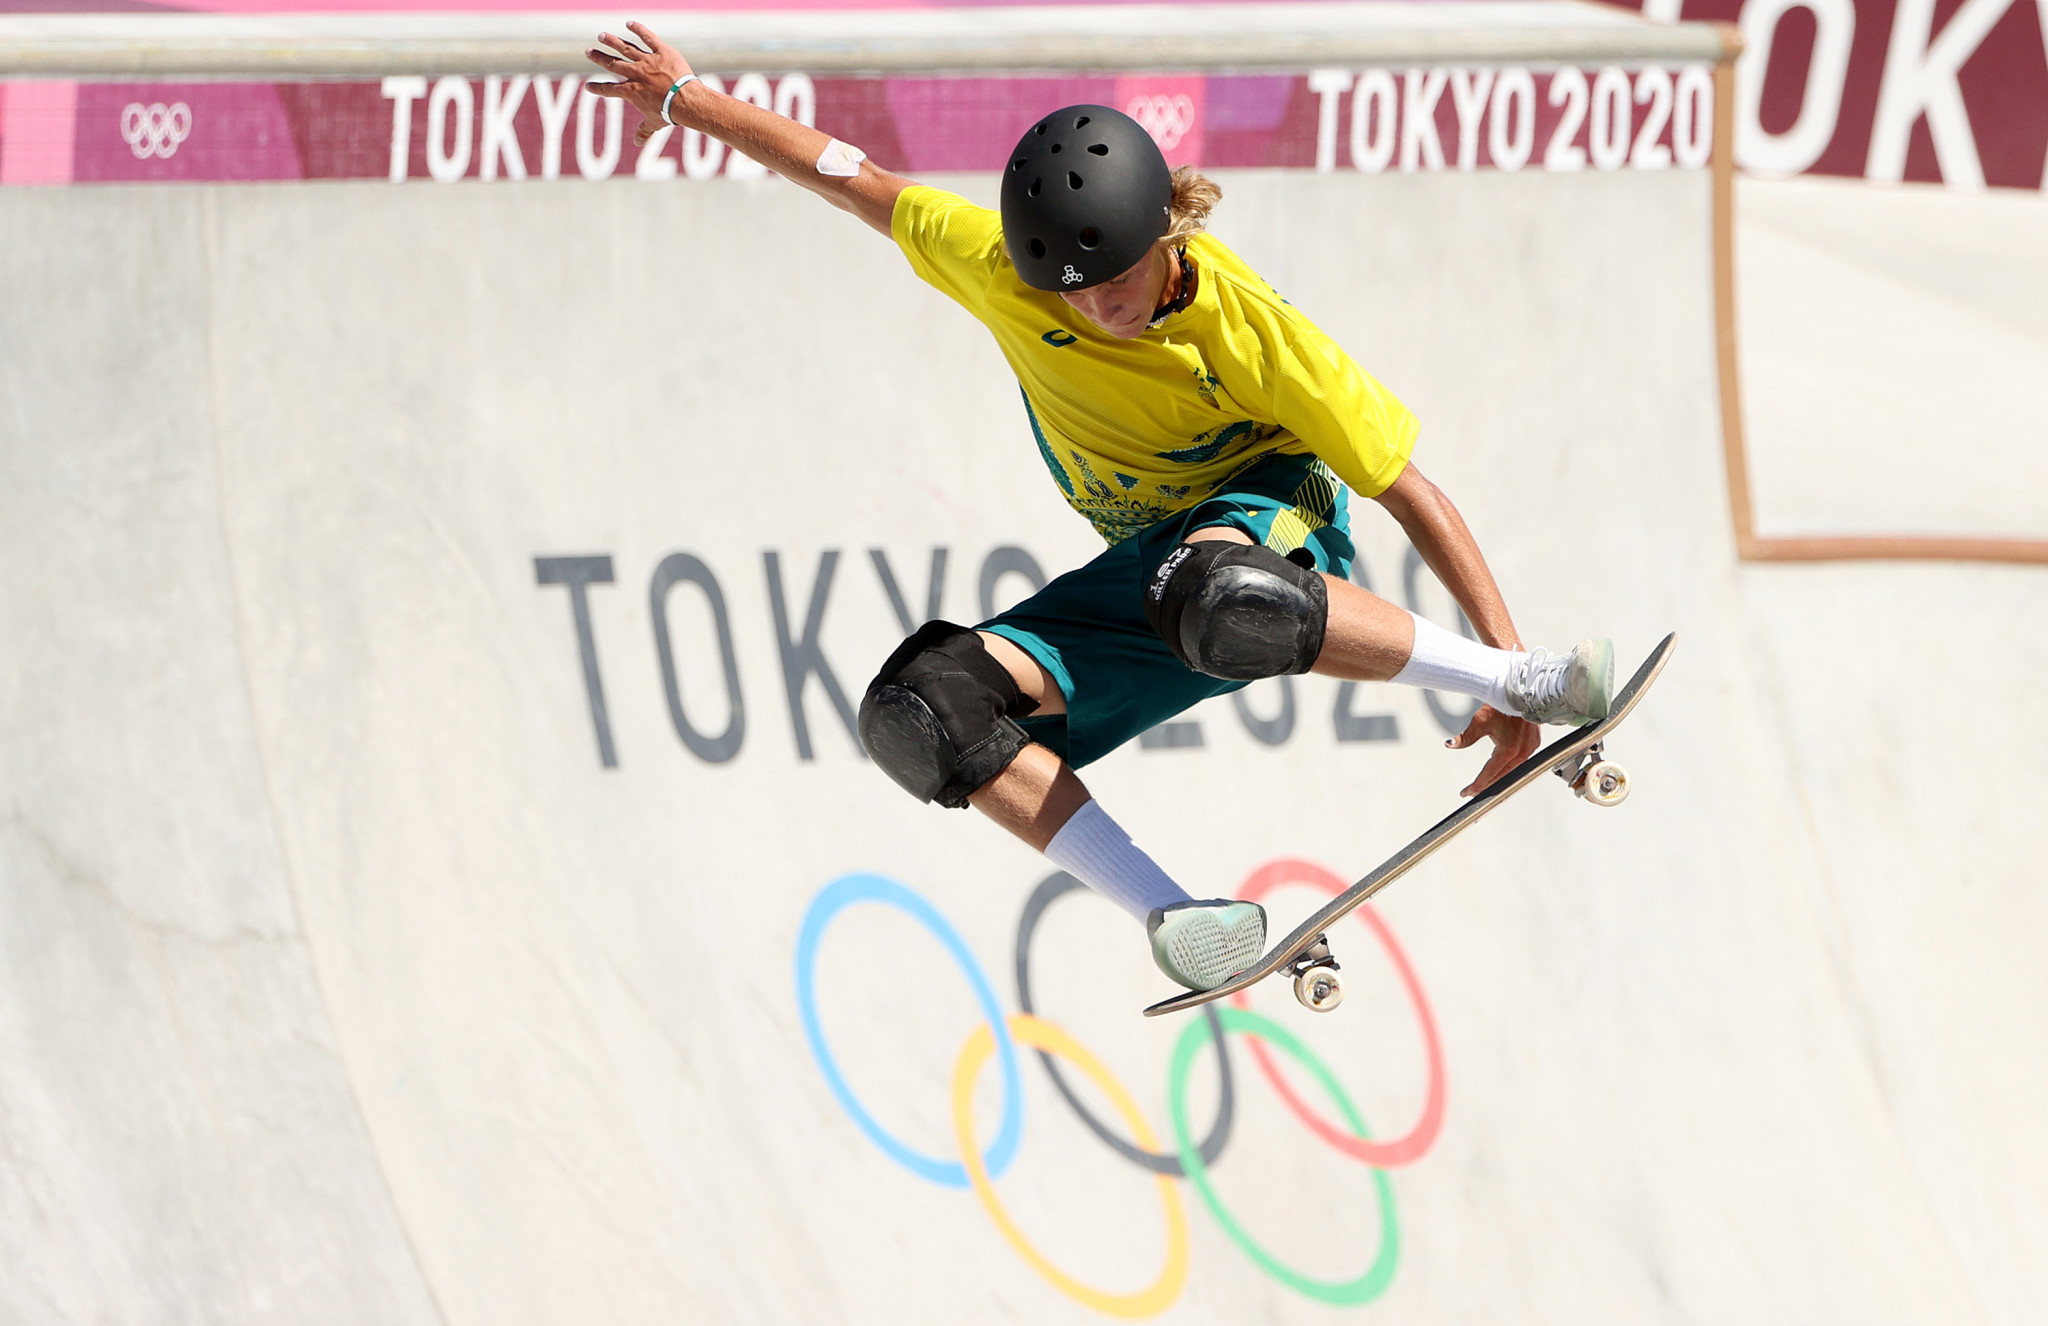 The Tokyo Metropolitan Government plans to develop a site for urban sports using Tokyo 2020 temporary venues as part of its legacy programme ©Getty Images